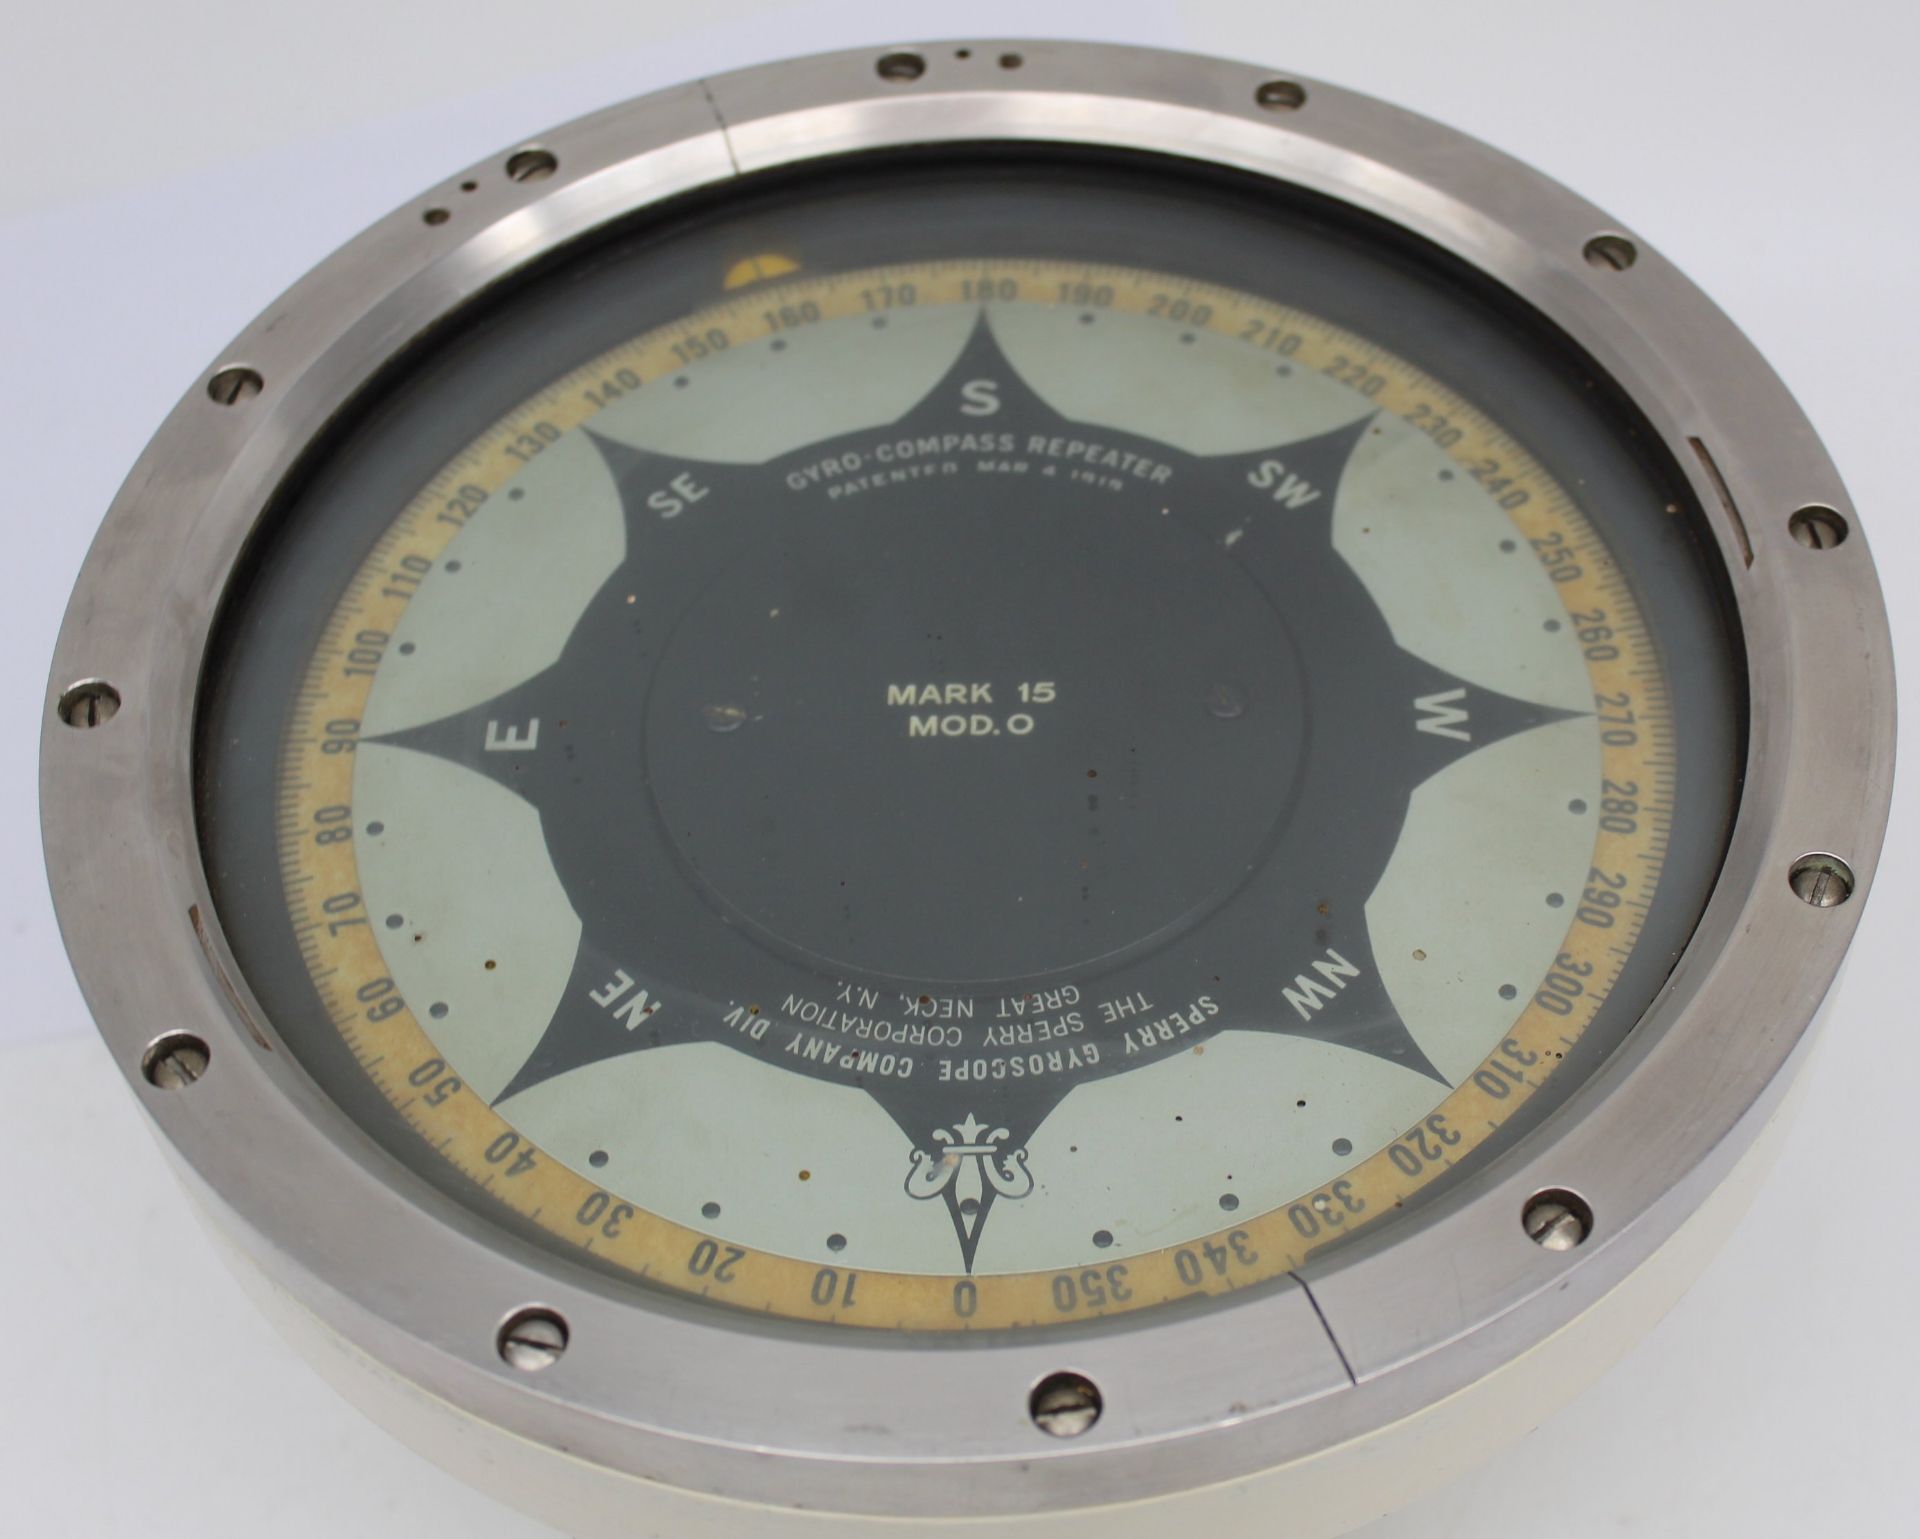 Sperry Gyro Compass Repeater "Mark 15" New York, H-19 cm, D-25 cm - Image 3 of 13